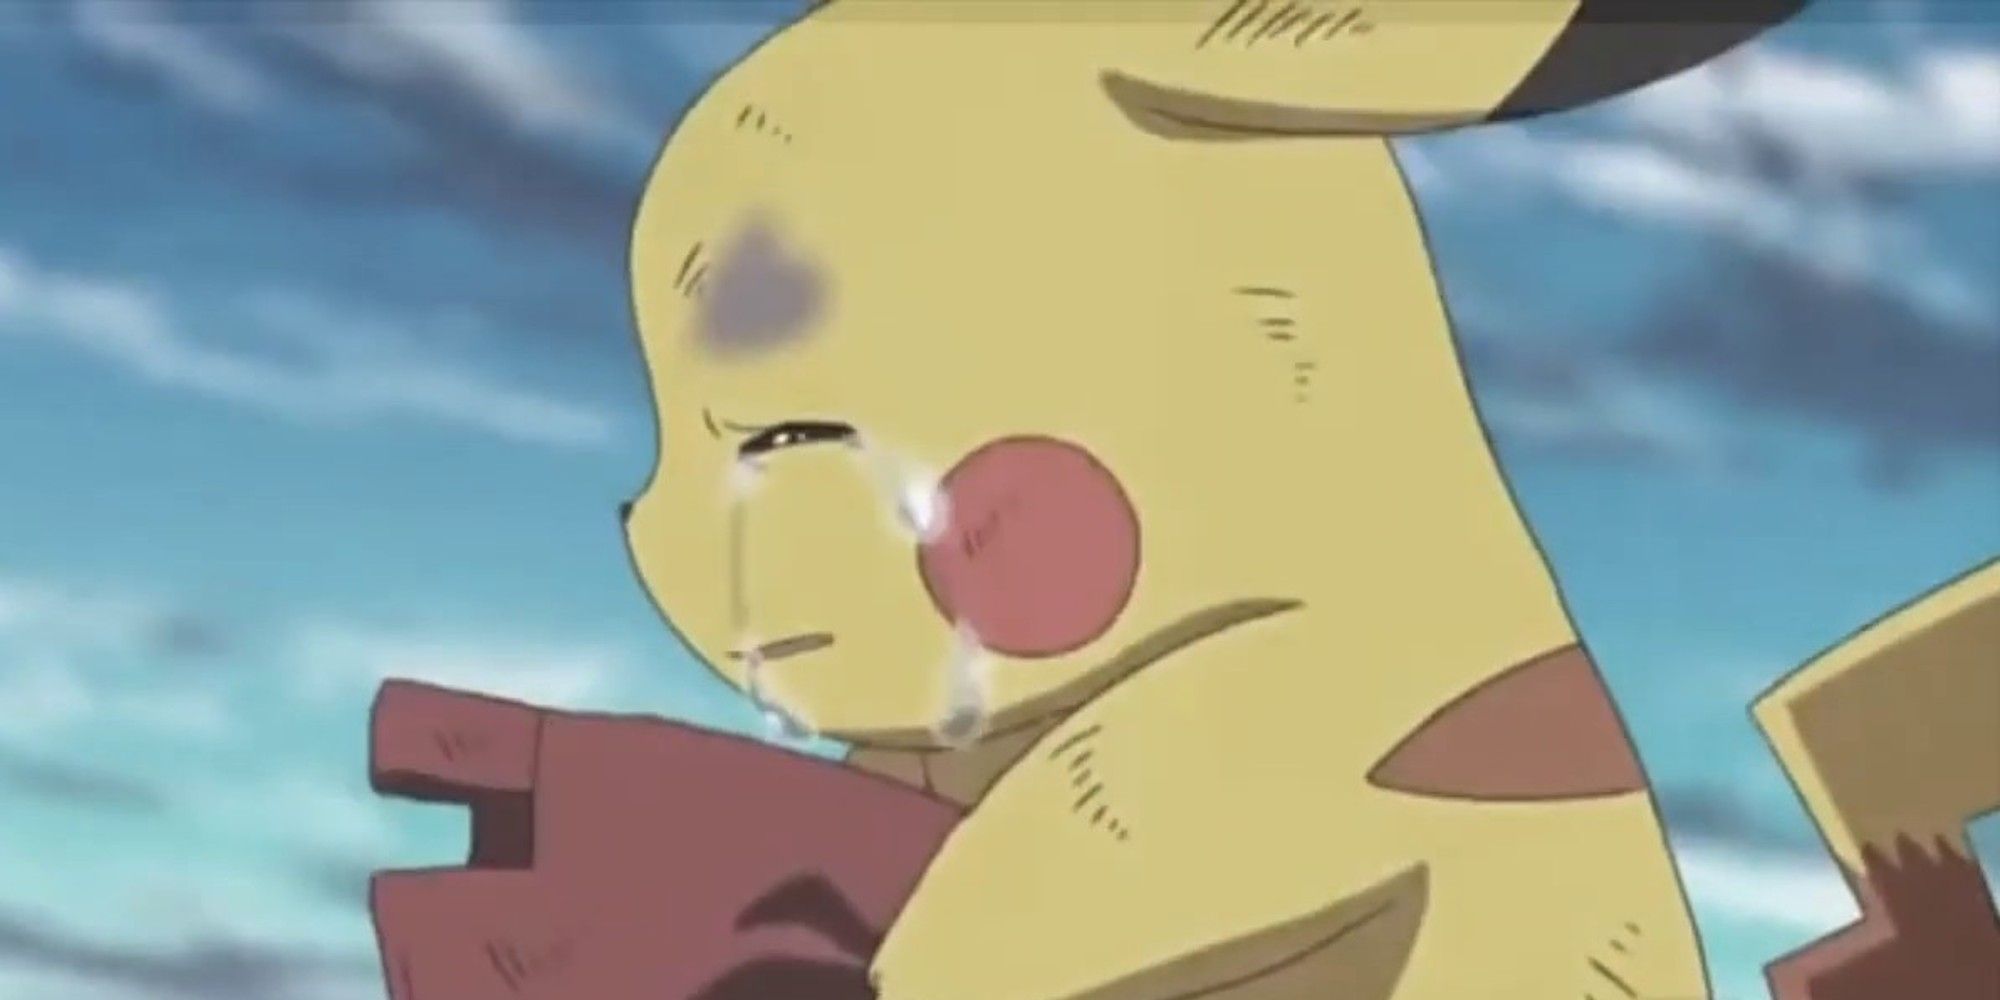 pikachu holding ash's hat and crying